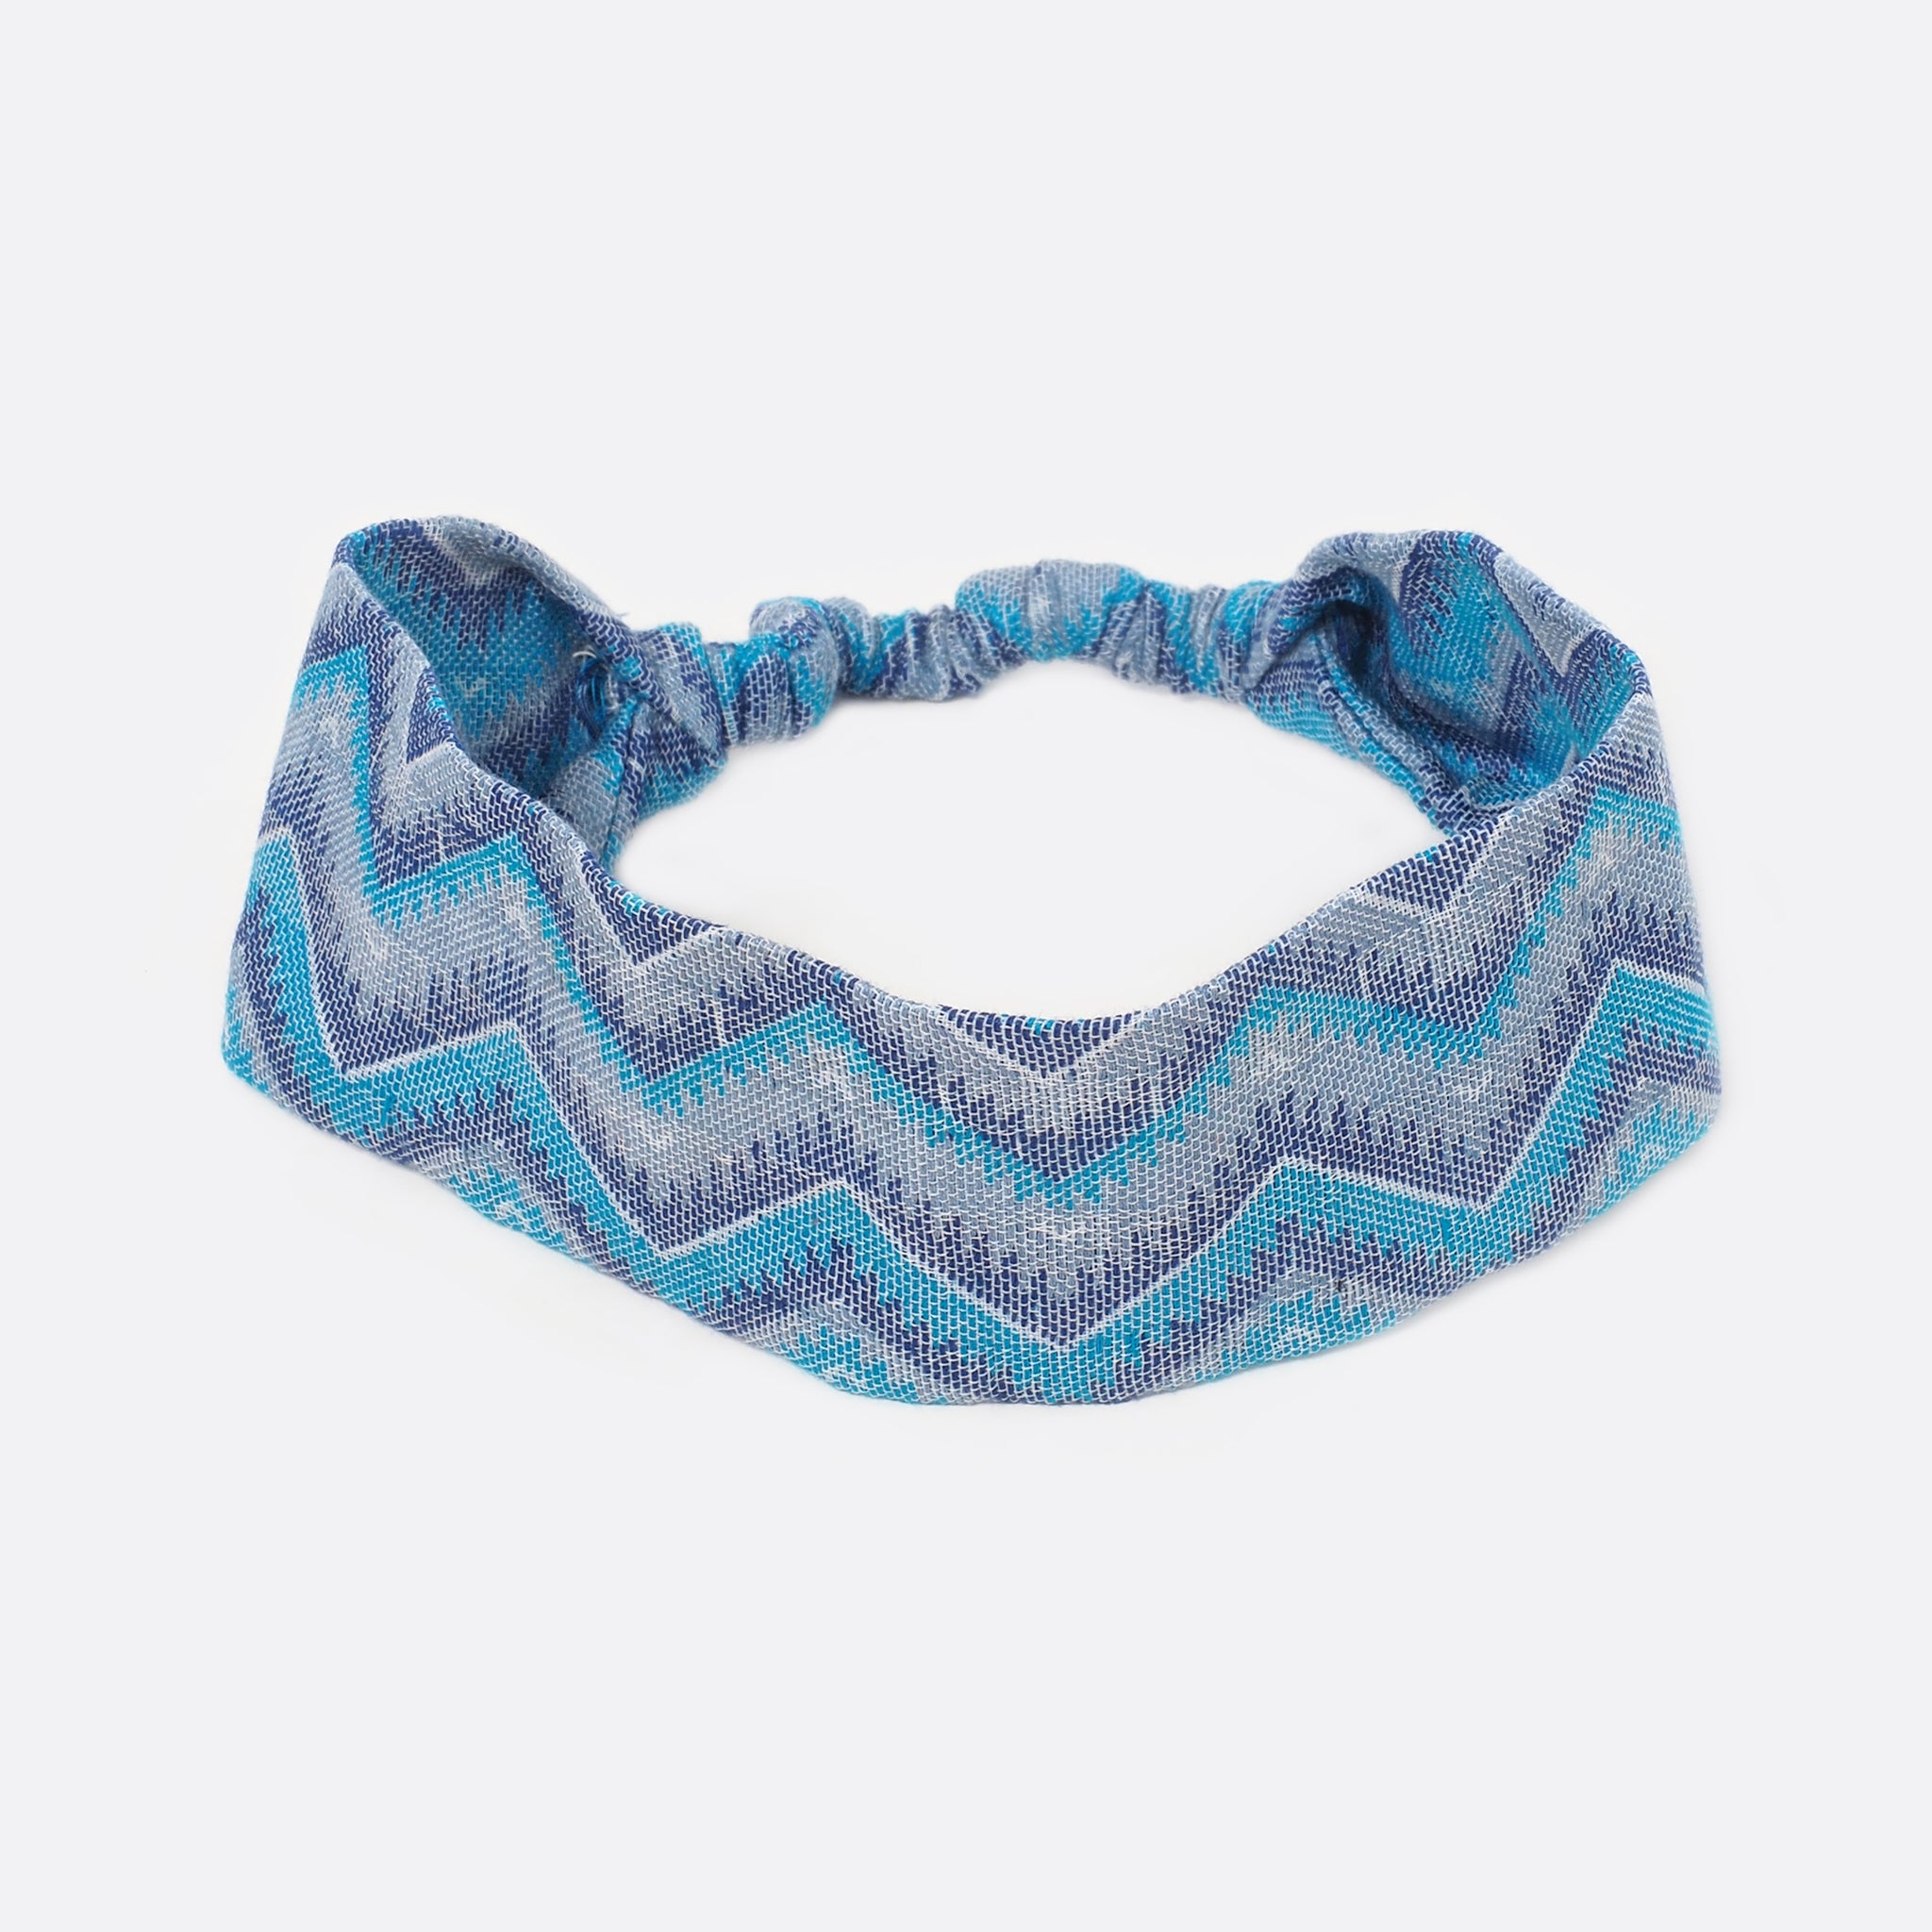 Top view of the Battiayo Sun & Moon Blue headband. The handwoven traditional dhaka fabric has different shades of blue and a bit of white. The dhaka fabric has a geometric pattern and is handwoven by amazing women. The pattern is a zigzag pattern.